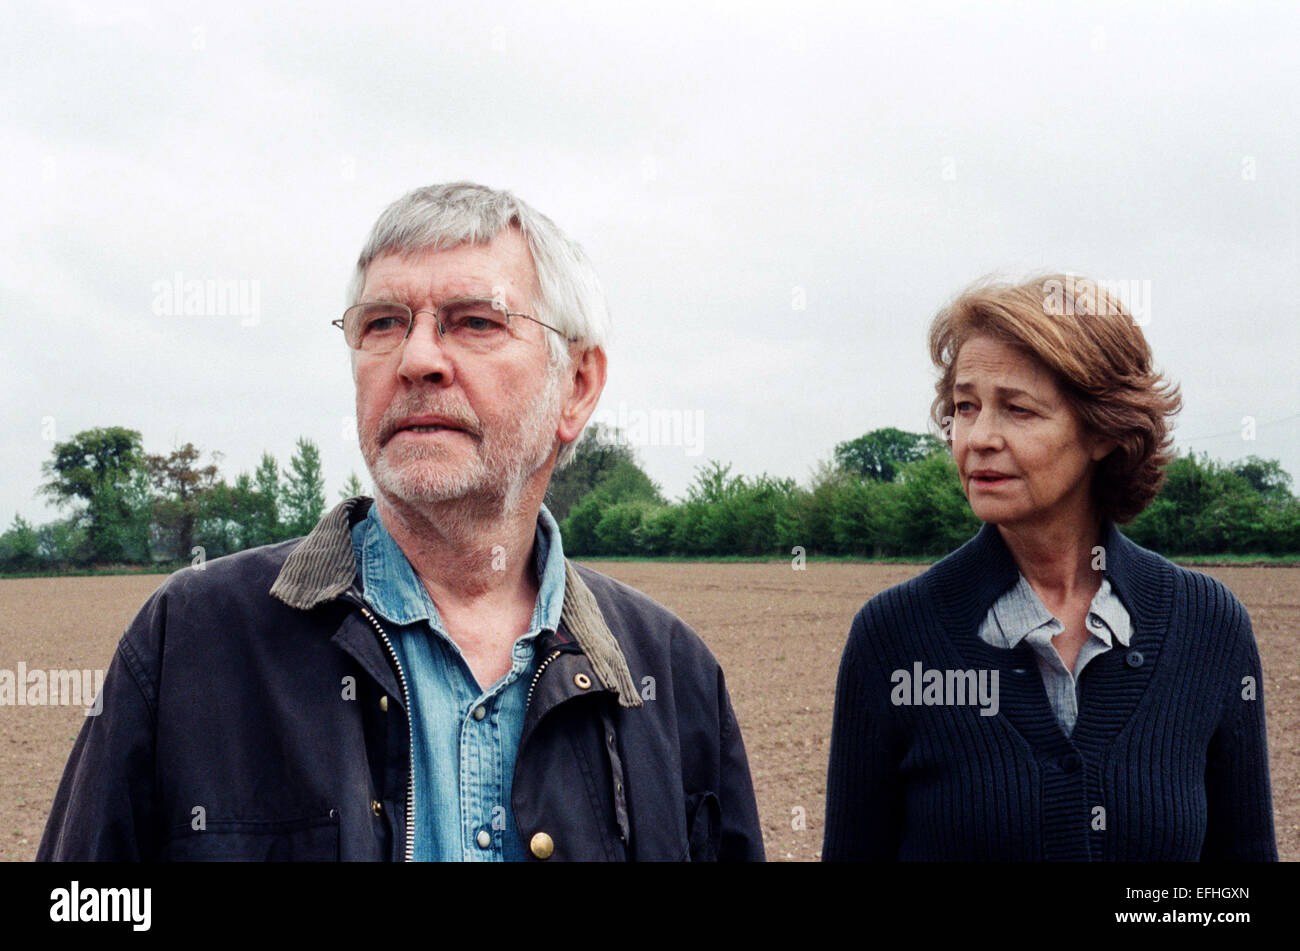 An undated handout picture shows actors Tom Courtenay and Charlotte Rampling in a still from the film '45 Years' by director Andrew Haigh. The movie will be presented in the Official Competition of the 65th annual Berlin Film Festival 'Berlinale', which runs from 05 to 15 February 2015. PHOTO: AGATHA A. NITECKA/45 YEARS FILM LTD /BERLINALE/dpa - MANDATORY CREDIT/NO SALES/USE ONLY UNTIL 15 March 2015 HANDOUT EDITORIAL USE ONLY - Stock Photo